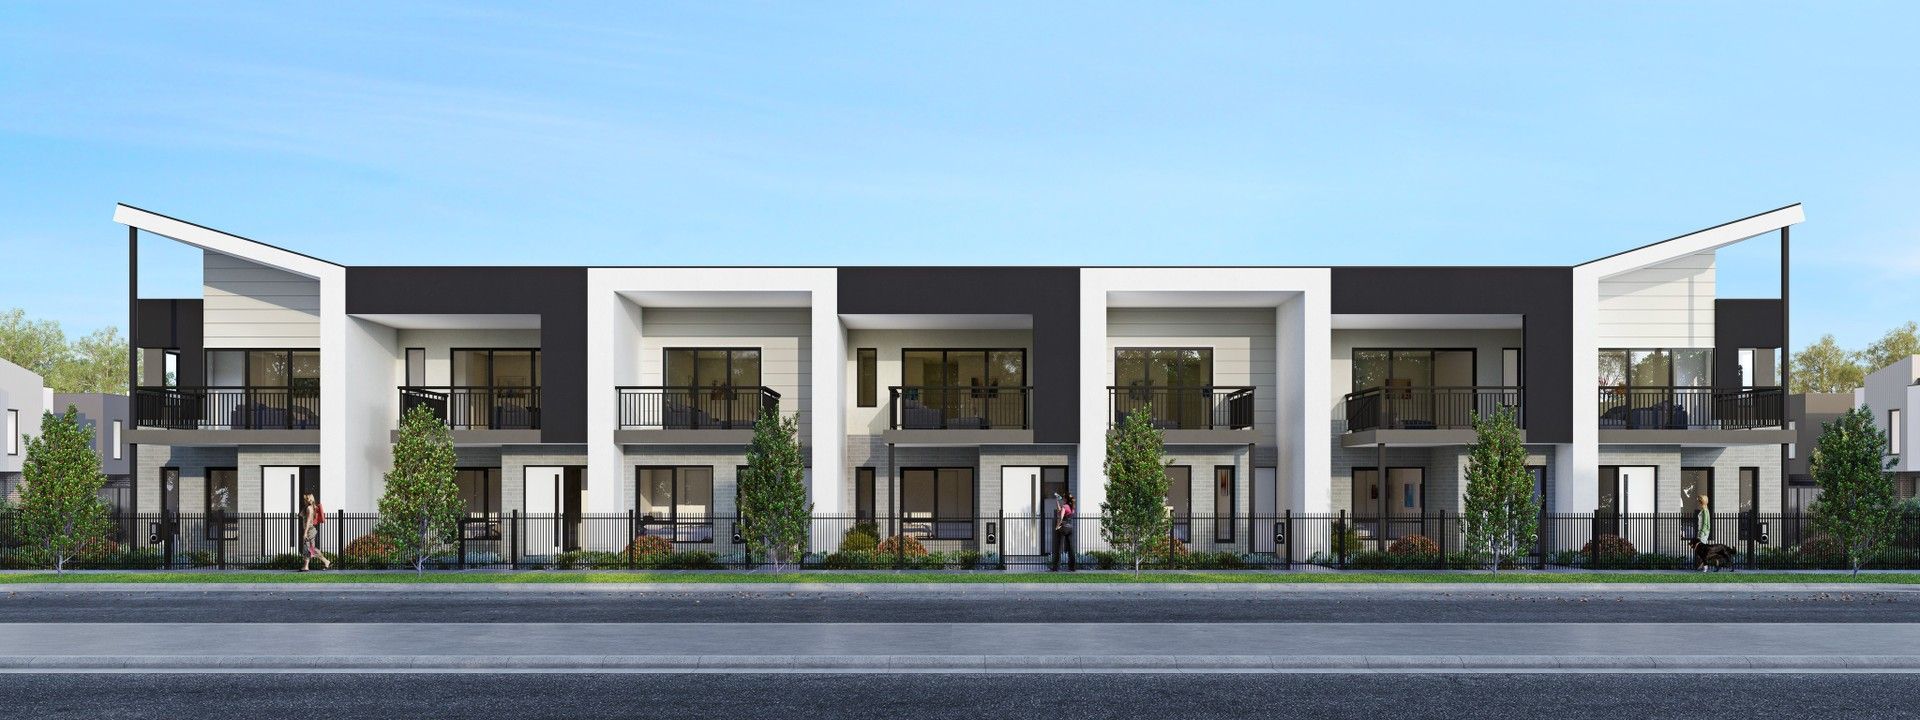 Parkville Mid Townhome by Metricon Homes, Kalkallo VIC 3064, Image 0